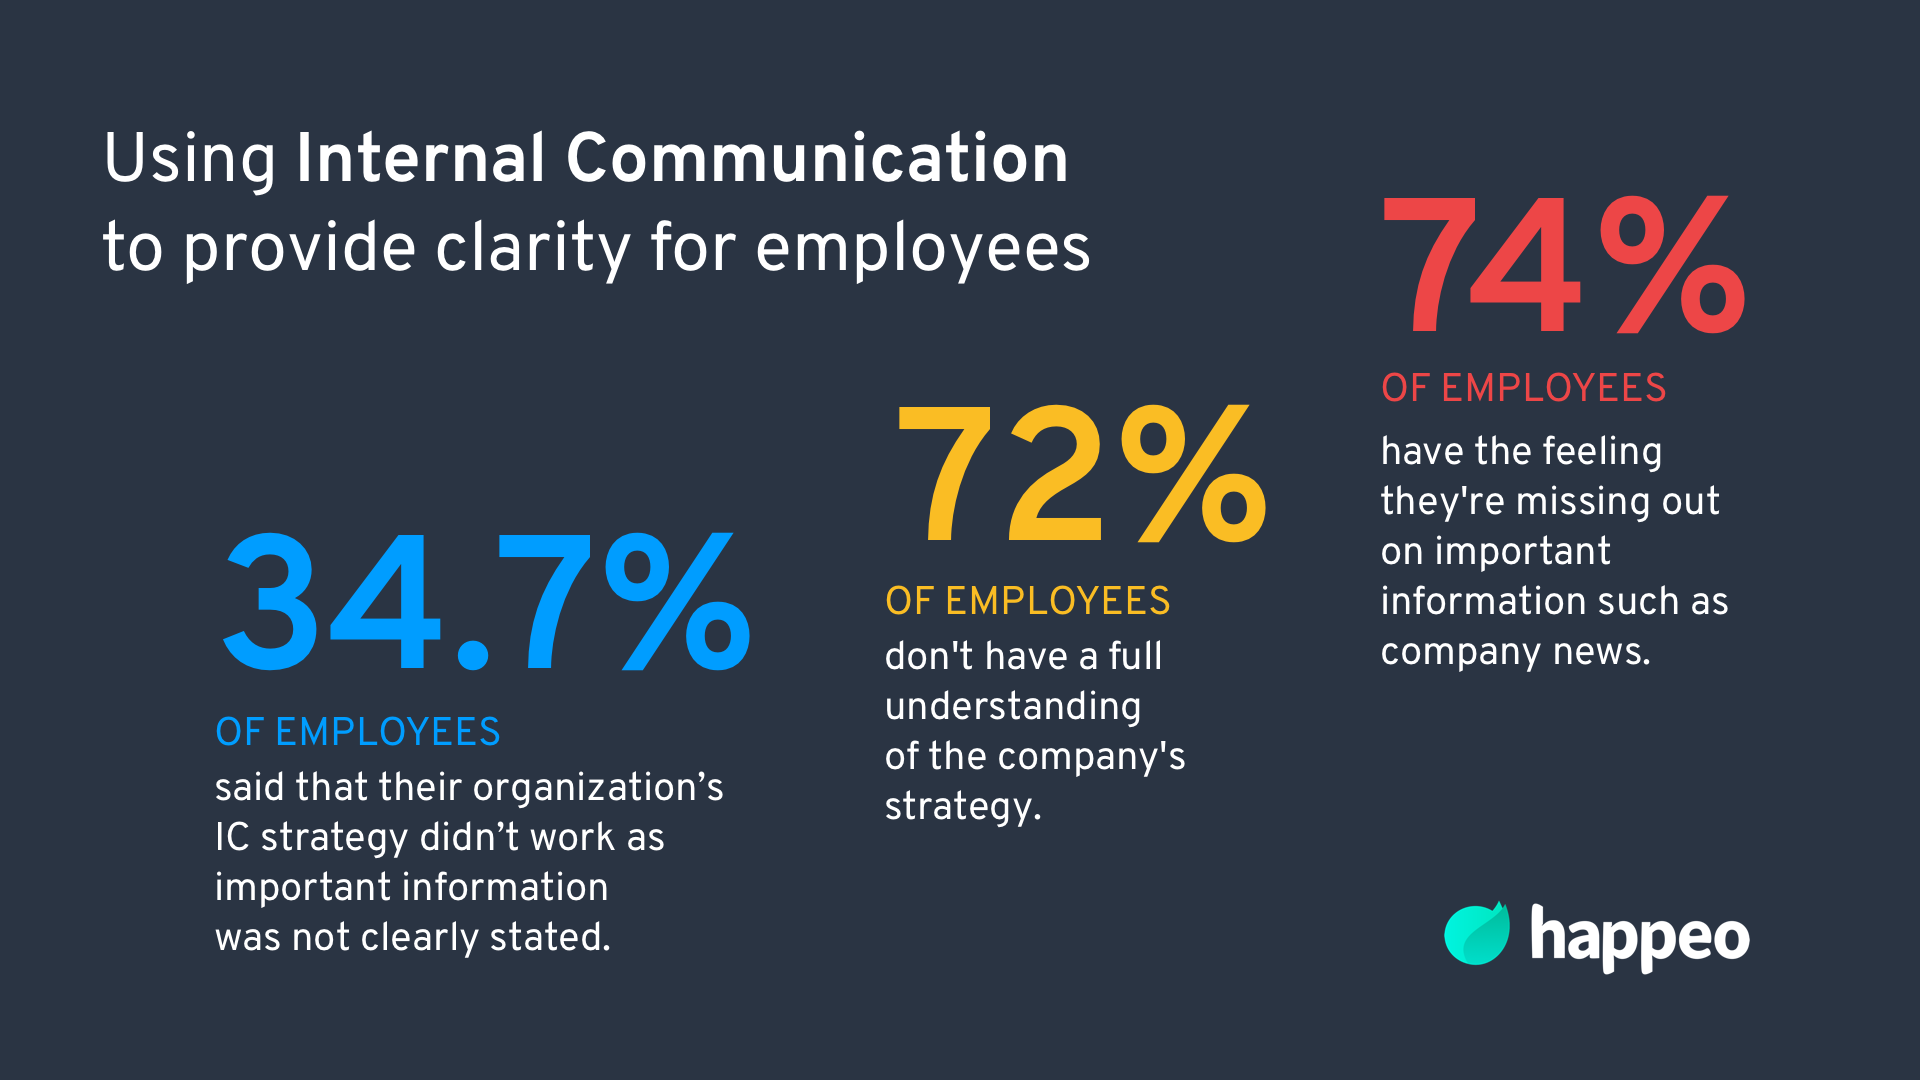 Internal communication for clarity at work